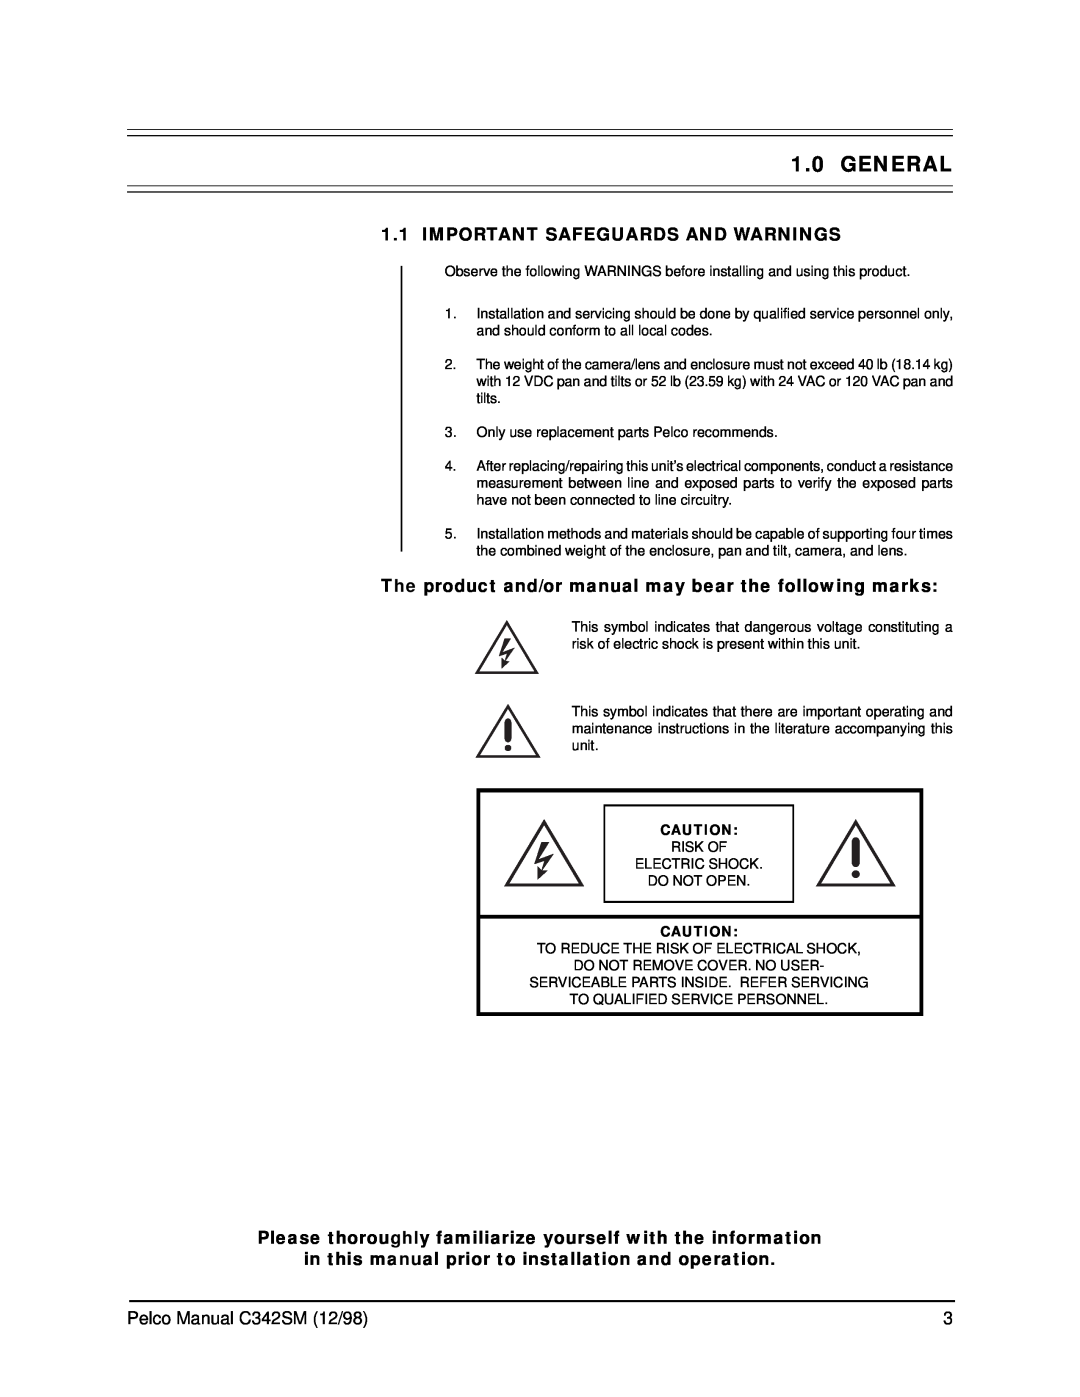 Pelco PT780 service manual General, Important Safeguards And Warnings, Pelco Manual C342SM 12/98 